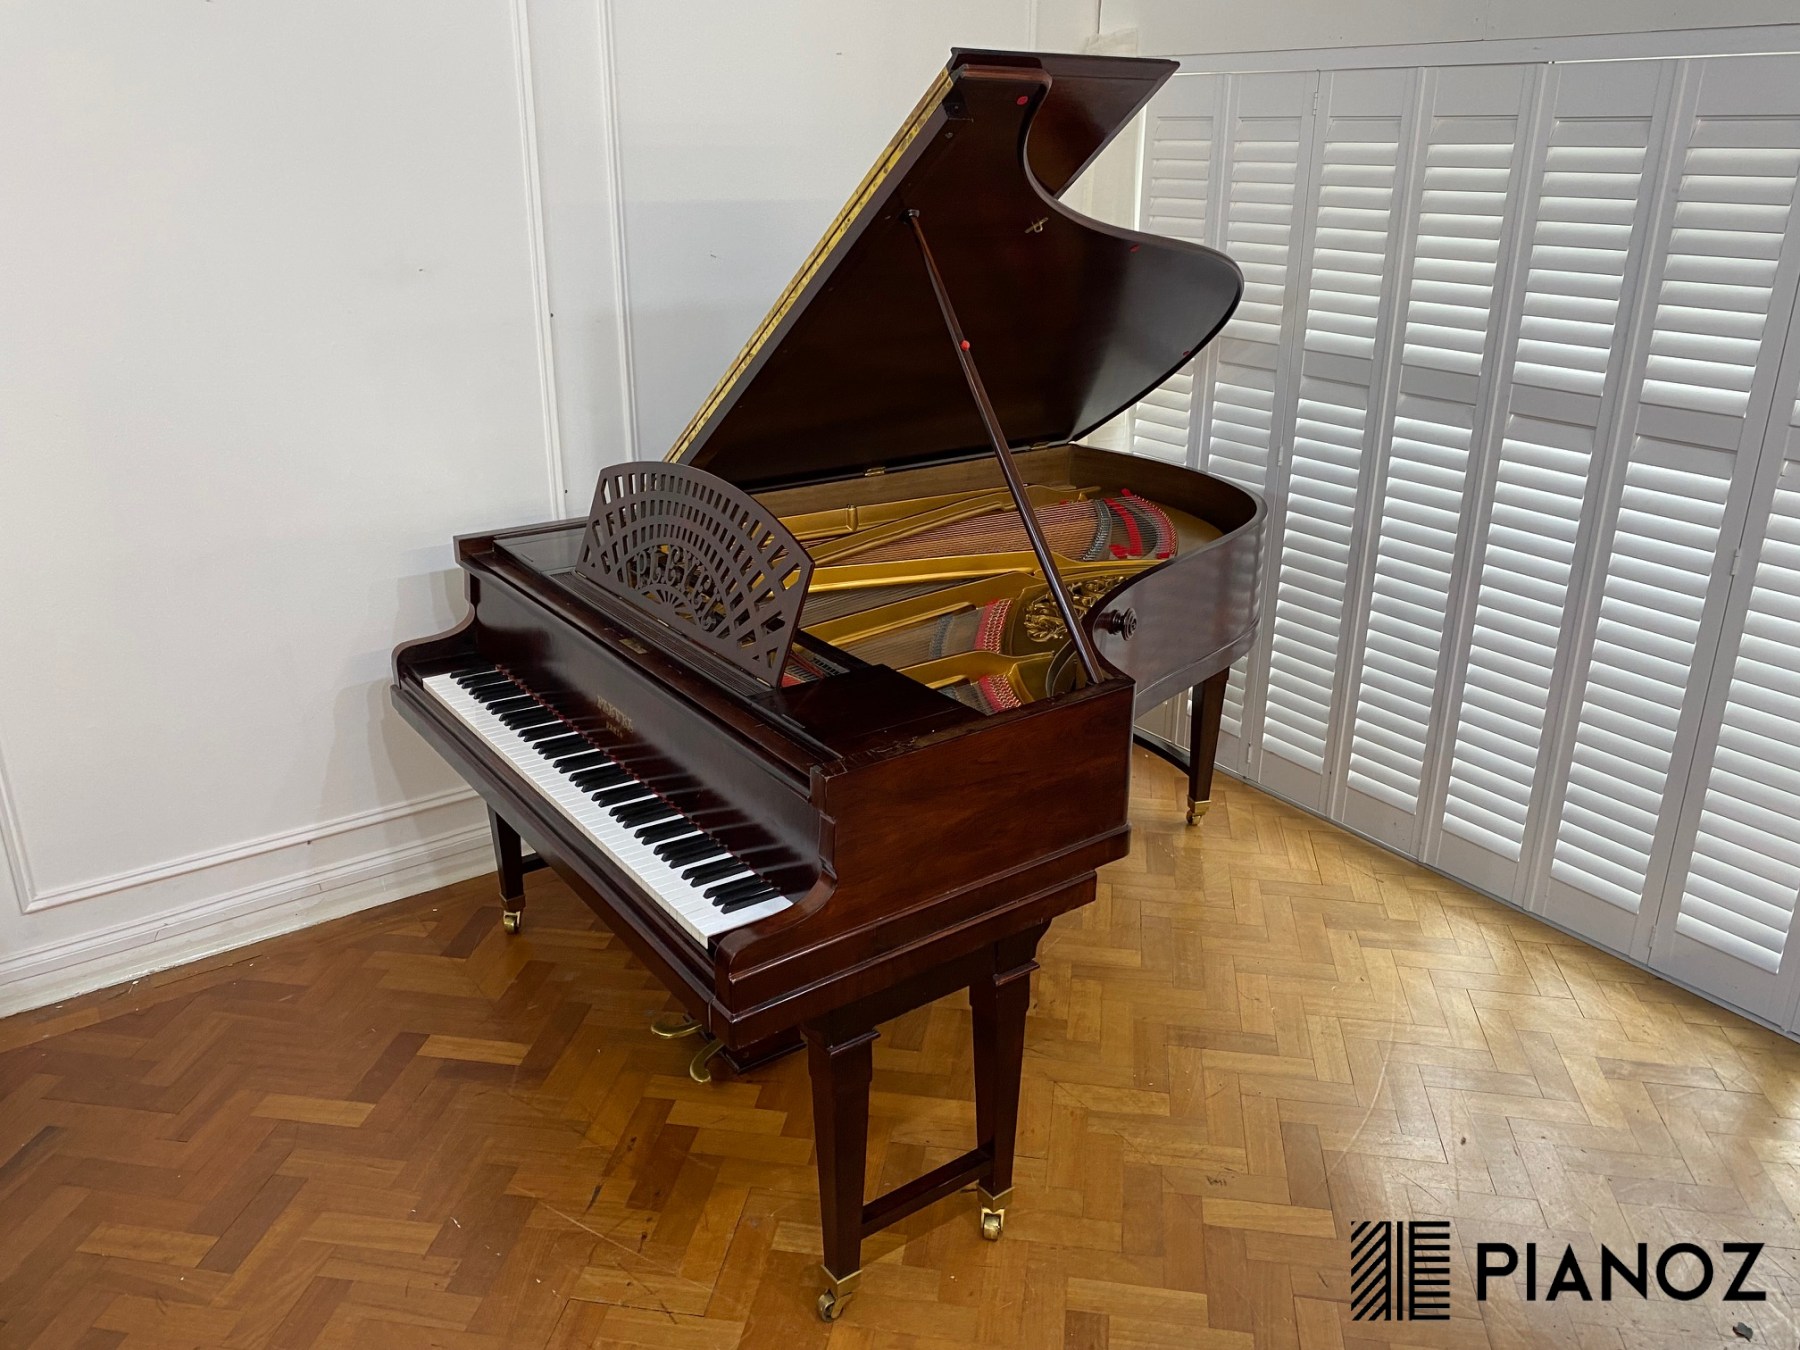 Pleyel Fully Restored Grand Piano piano for sale in UK